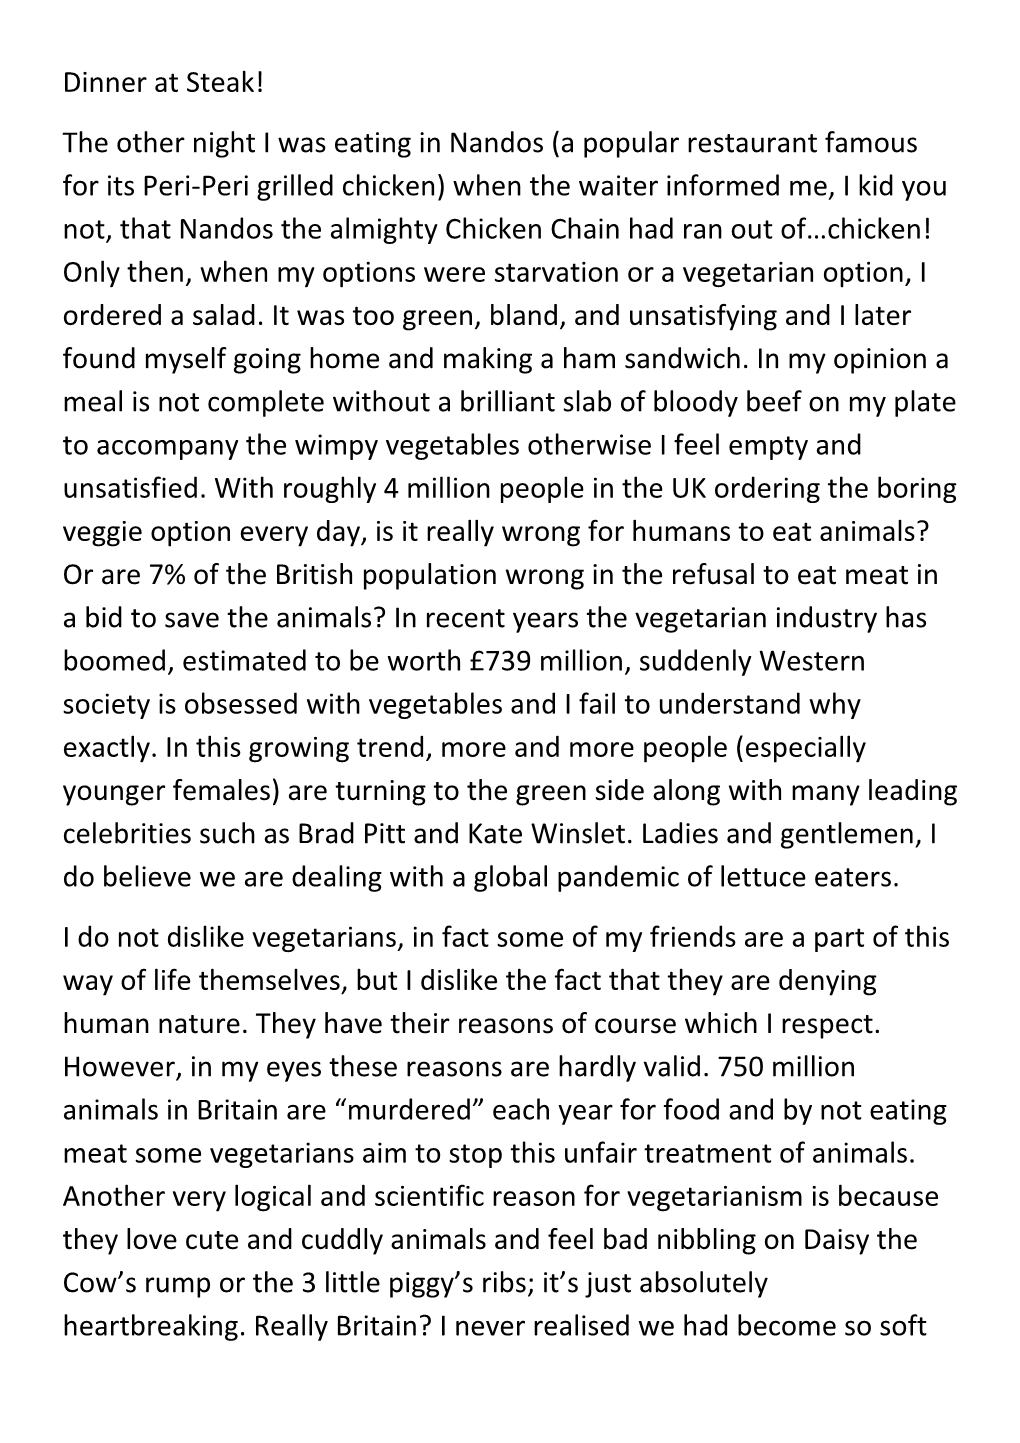 I Do Not Dislike Vegetarians, in Fact Some of My Friends Are a Part of This Way of Life